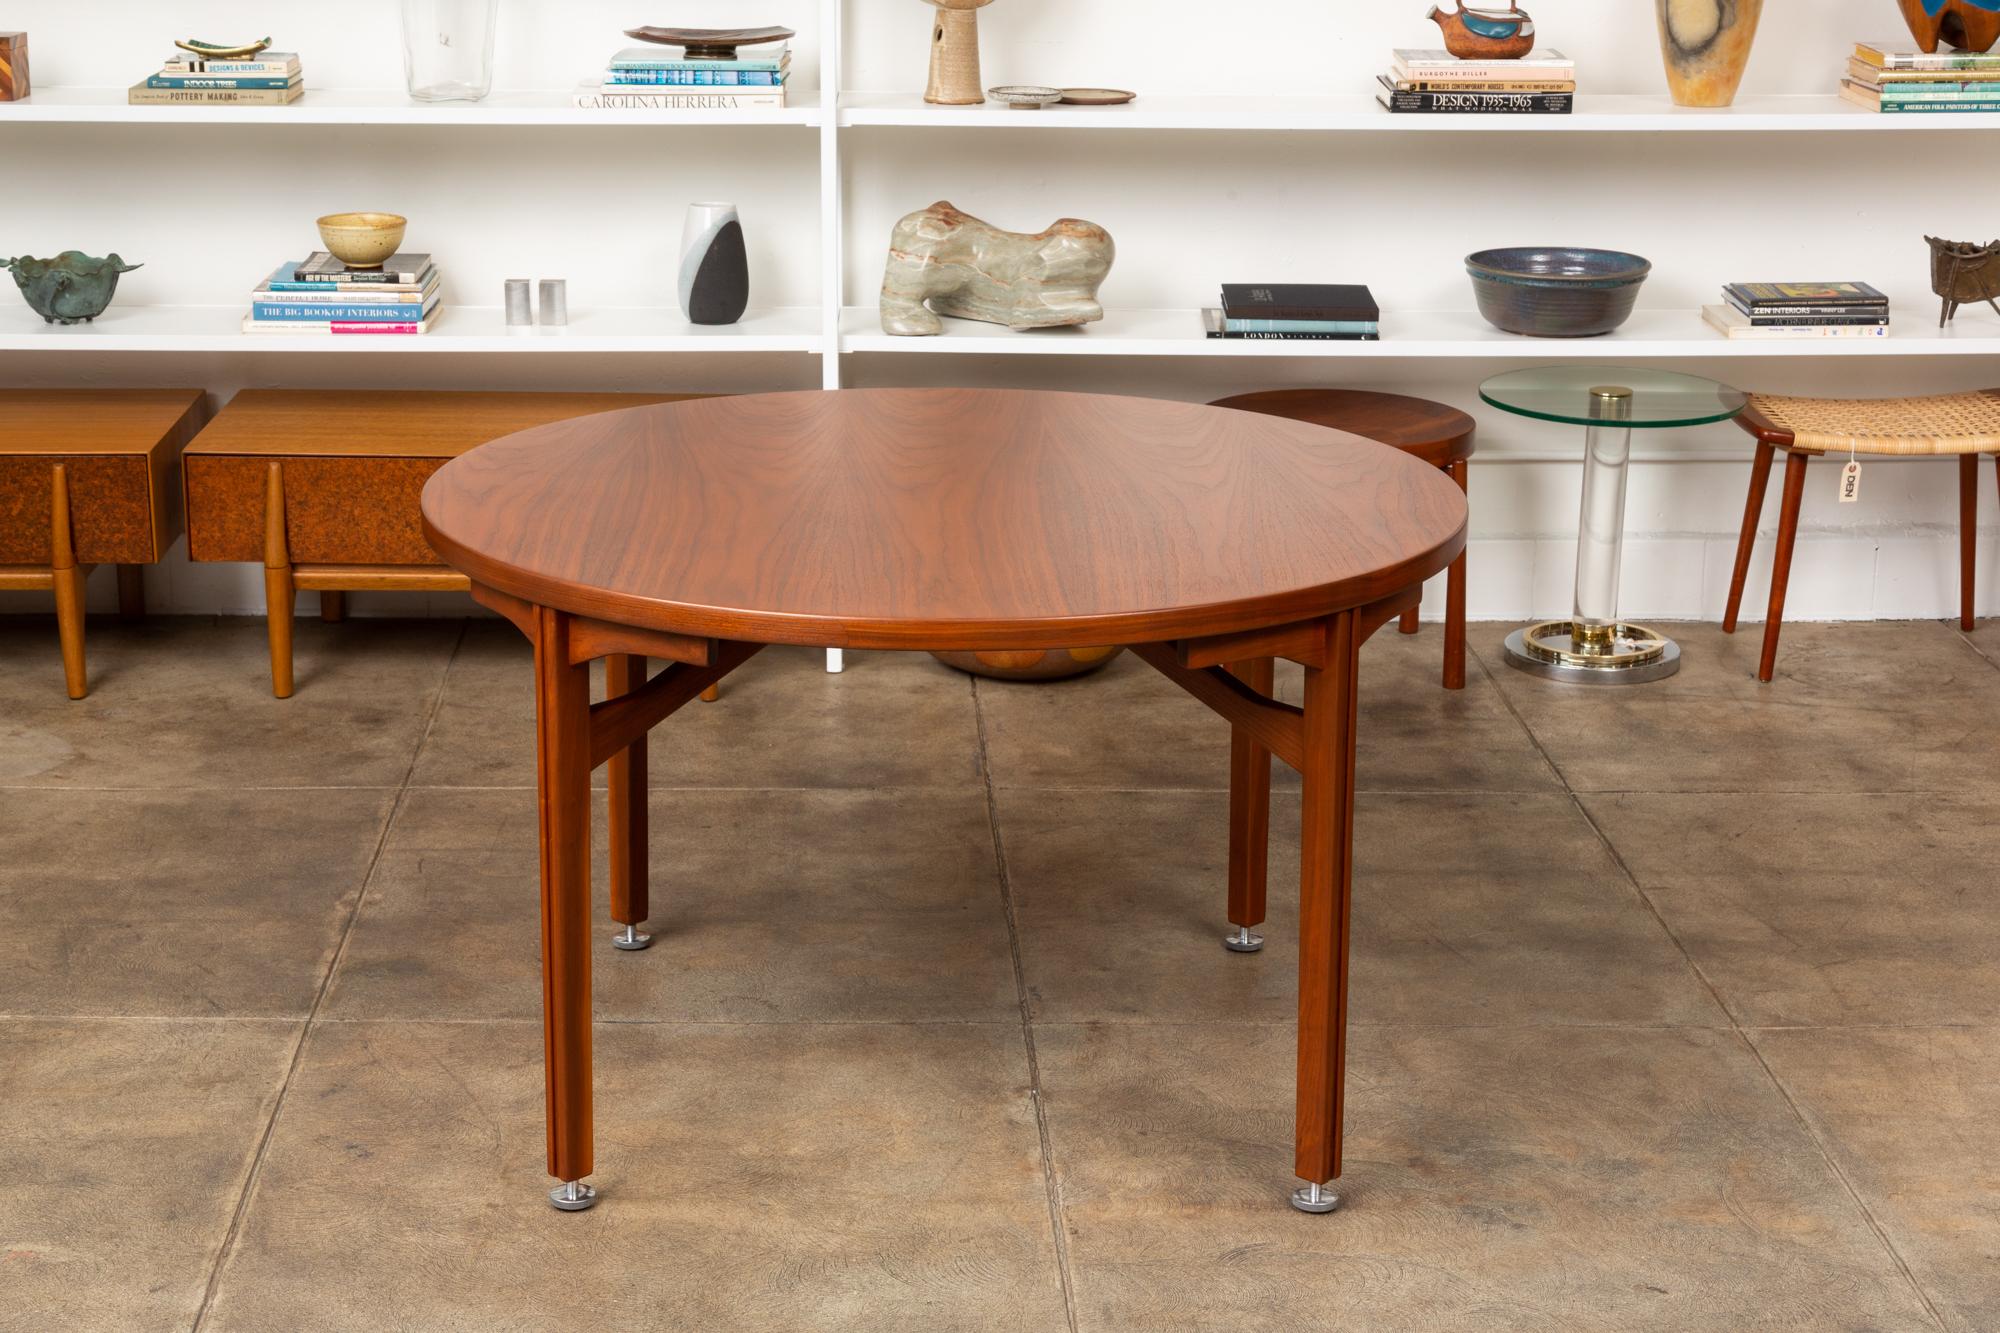 Round walnut dining table by Jens Risom for Risom Design, USA, circa 1960s. The table features a round walnut top supported by walnut legs with adjustable aluminum levelers. Retains original Risom Design Inc. tag on underside.

Condition;